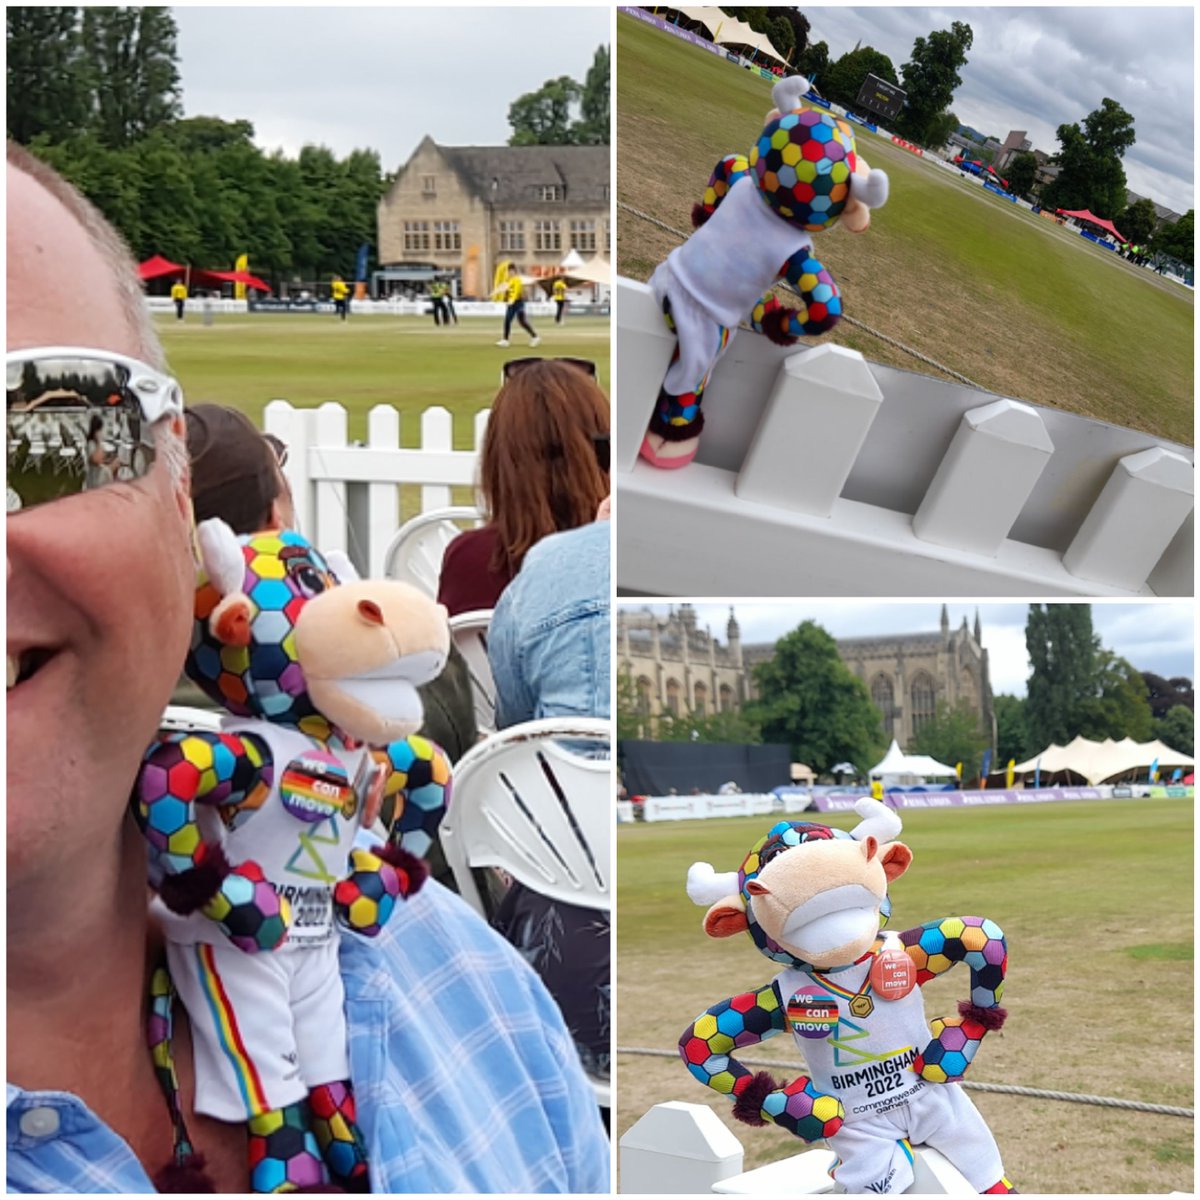 Perry enjoying some Rachel Heyhoe Flint Trophy cricket  on Saturday.
@_WesternStorm  hosted @SEStarsCricket at the quintessential Cheltenham Cricket Festival on his way to #Edgbaston for #B2022 #PoseWithPerry #Gloswecanmove @birminghamcg22 @wecan_move @activeglos @yourschoolgames